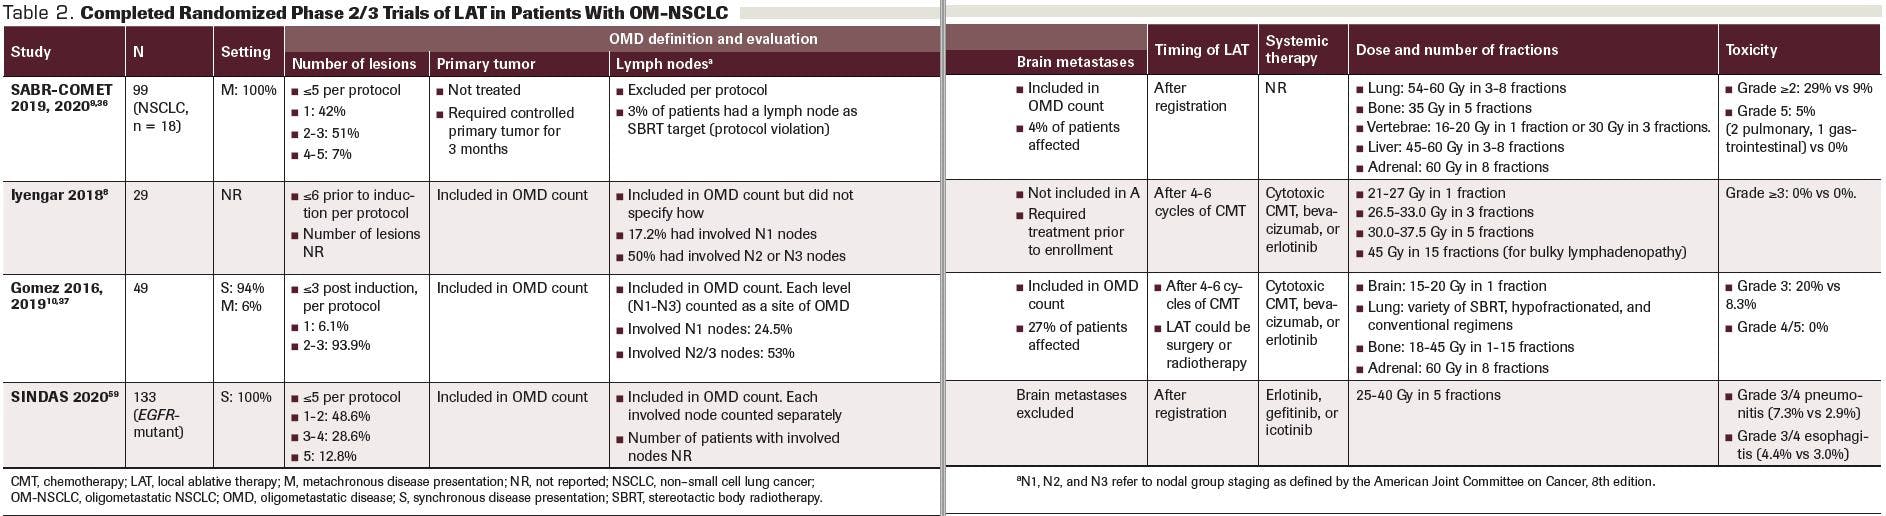 Table 2. Completed Randomized Phase 2/3 Trials of LAT in Patients With OM-NSCLC